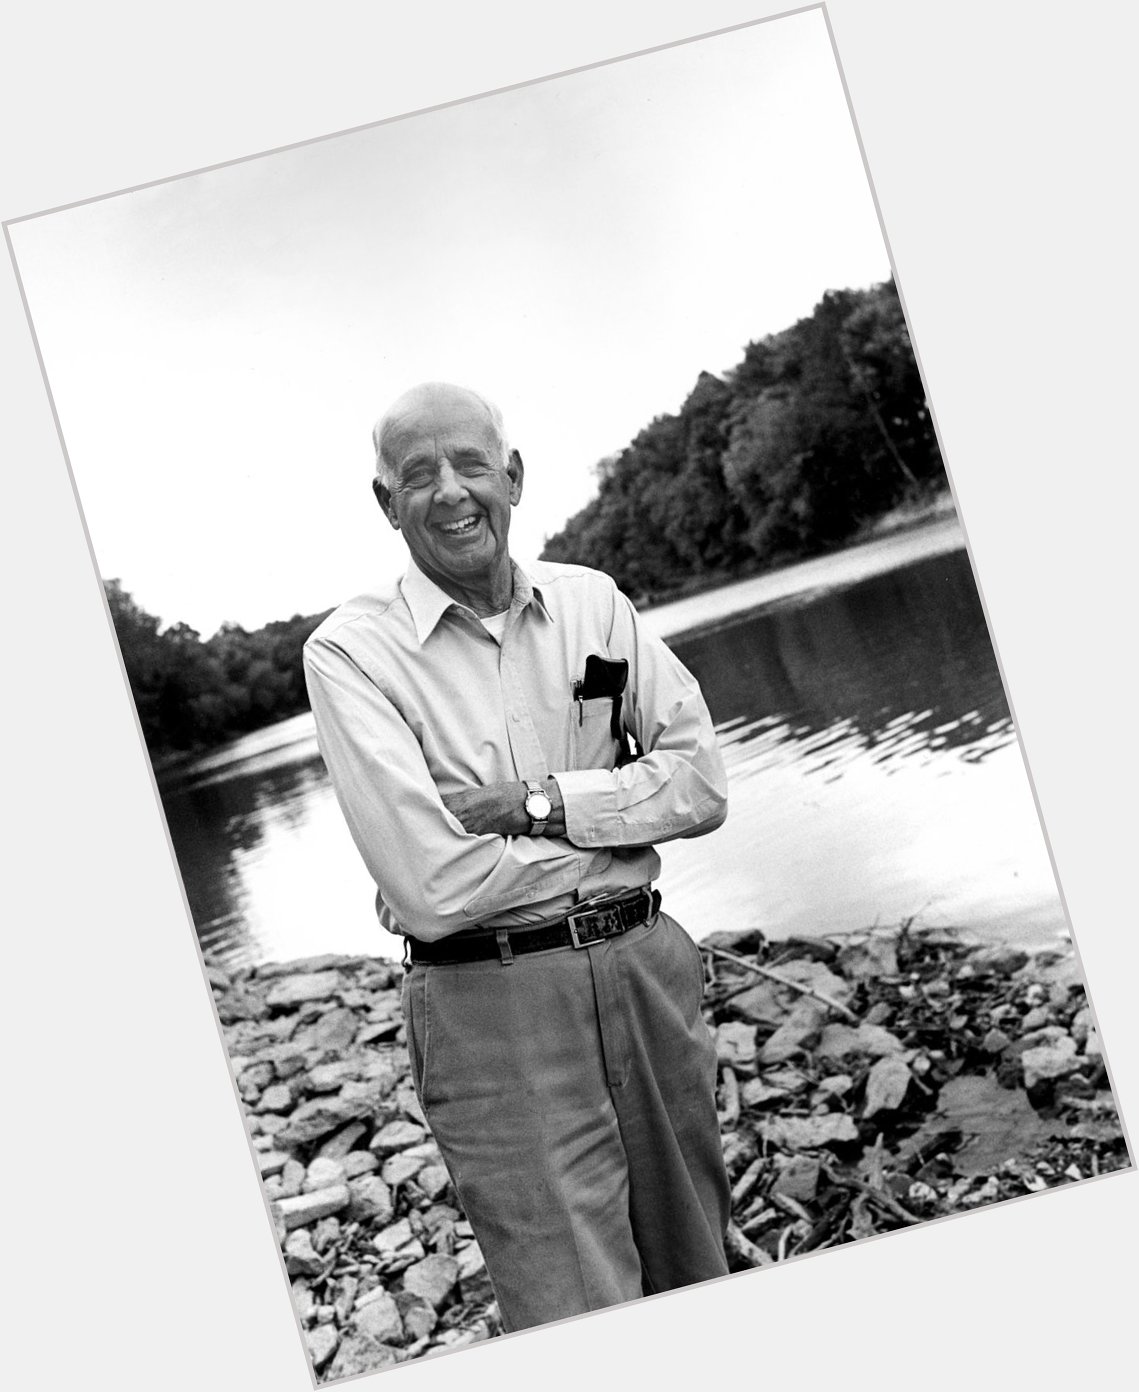 Please join us in wishing a happy birthday to our dear friend and inspiration Wendell Berry, who turns 87 today. 